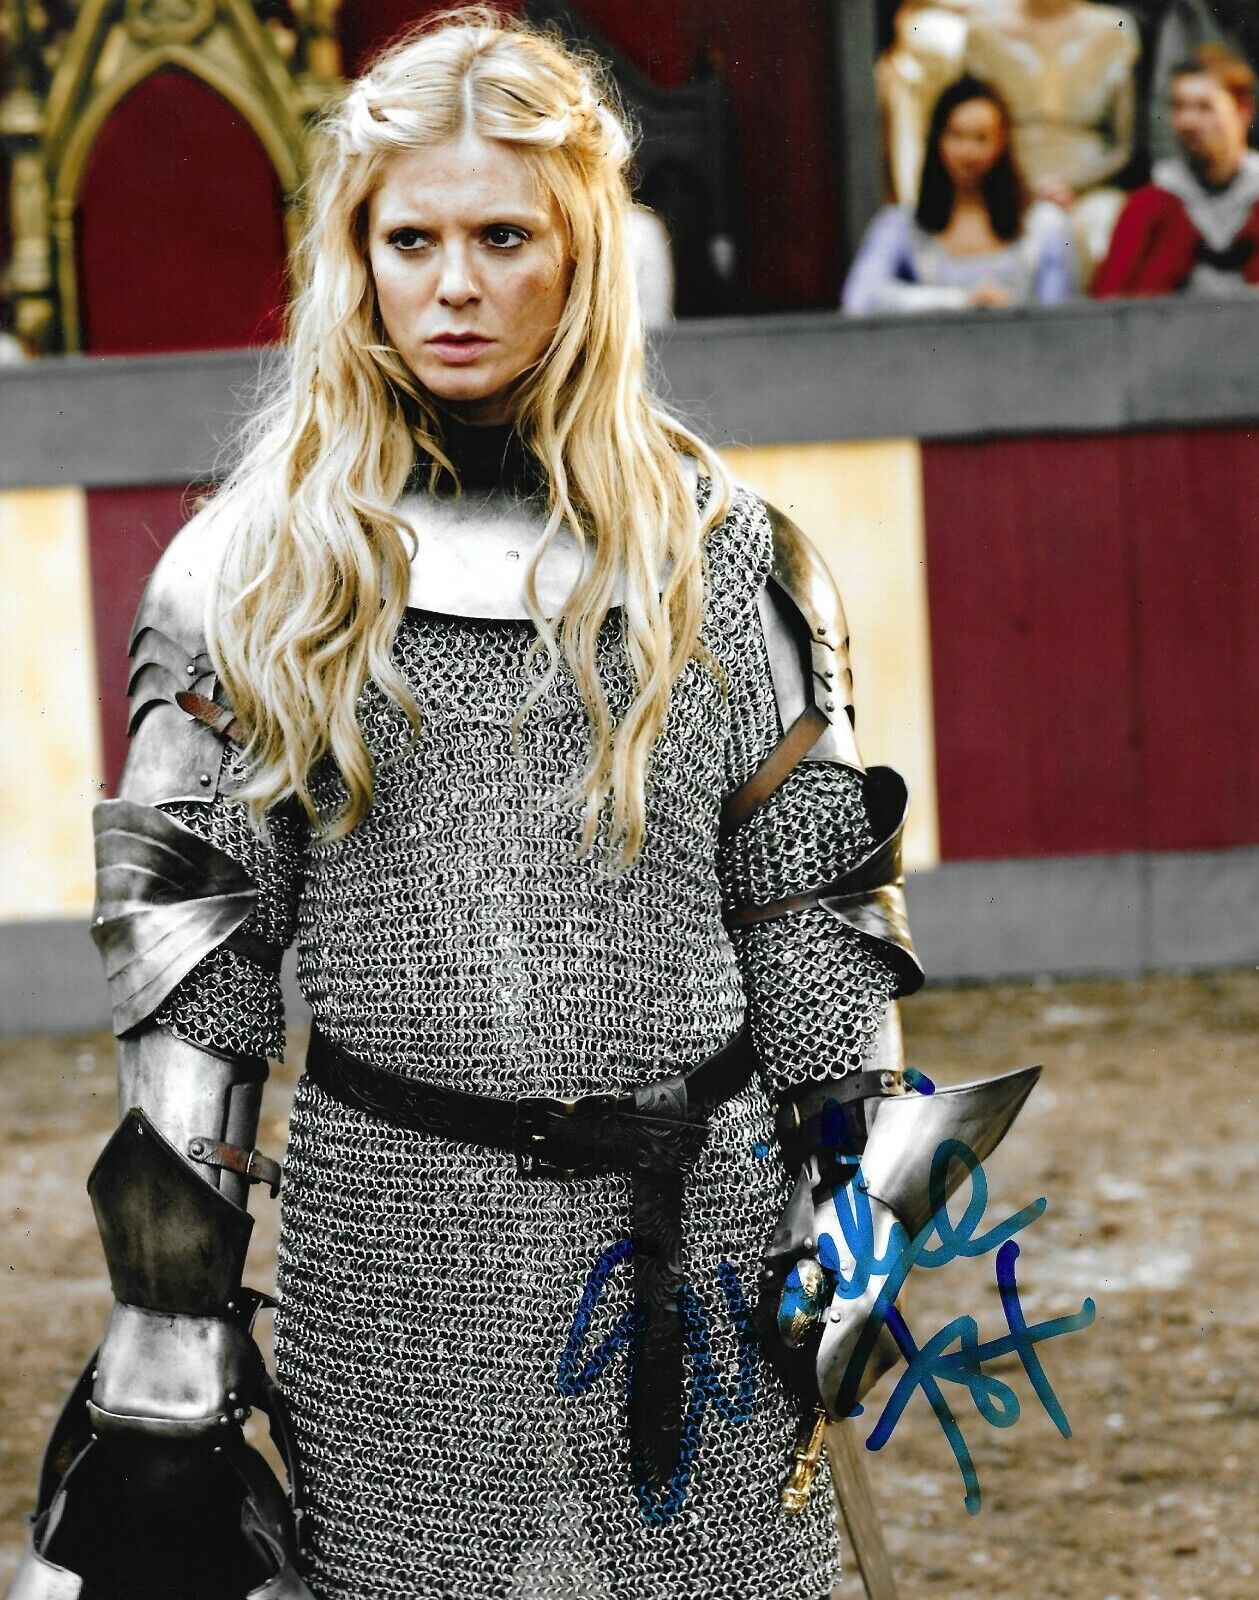 Emilia Fox Signed Merlin 10x8 Photo Poster painting AFTAL